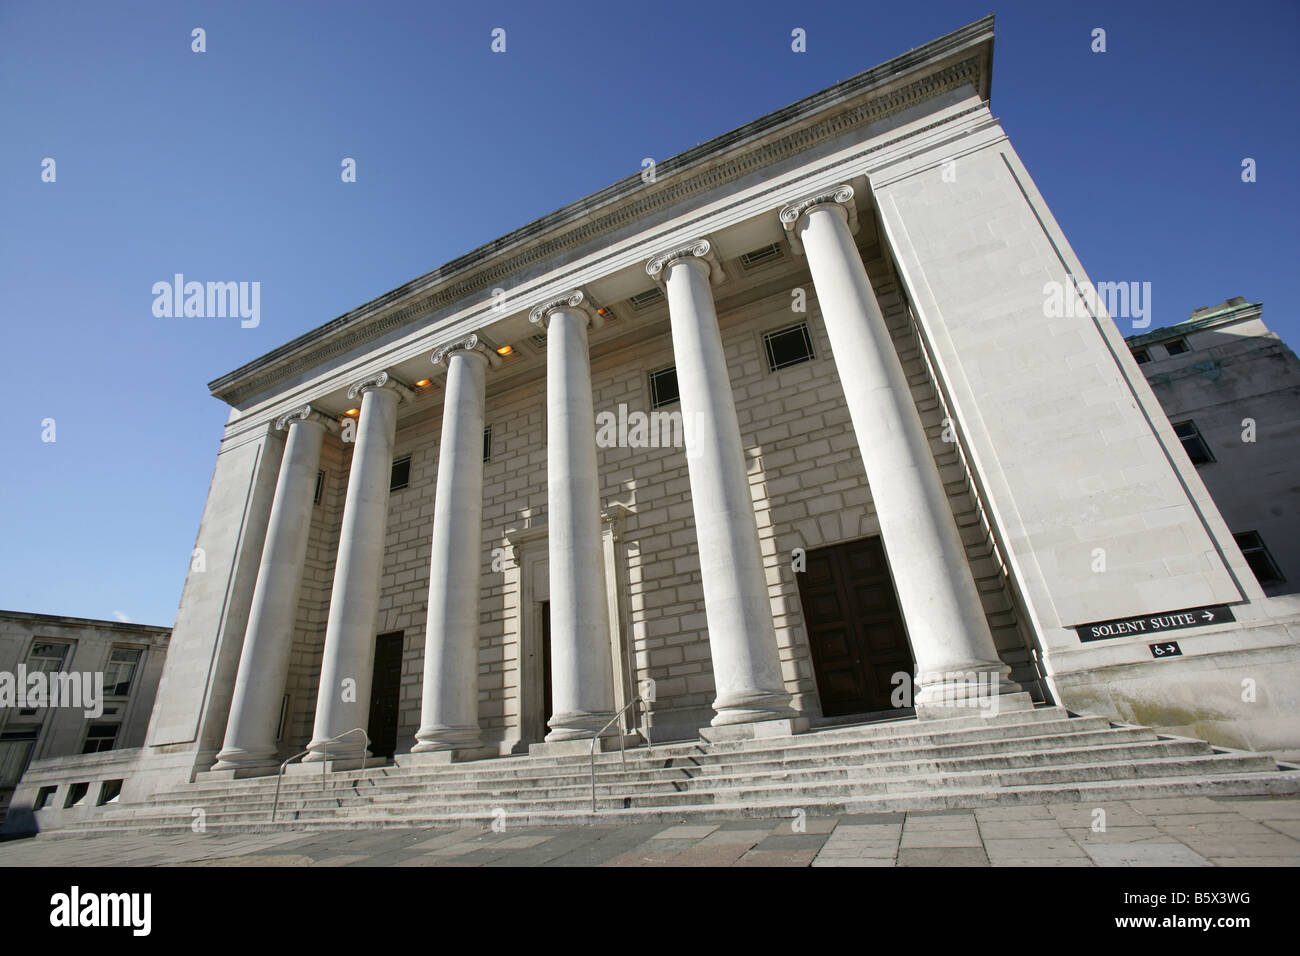 City of Southampton, England.  The colonnaded Guildhall entertainment venue on the east wing of the Southampton Civic Centre. Stock Photo